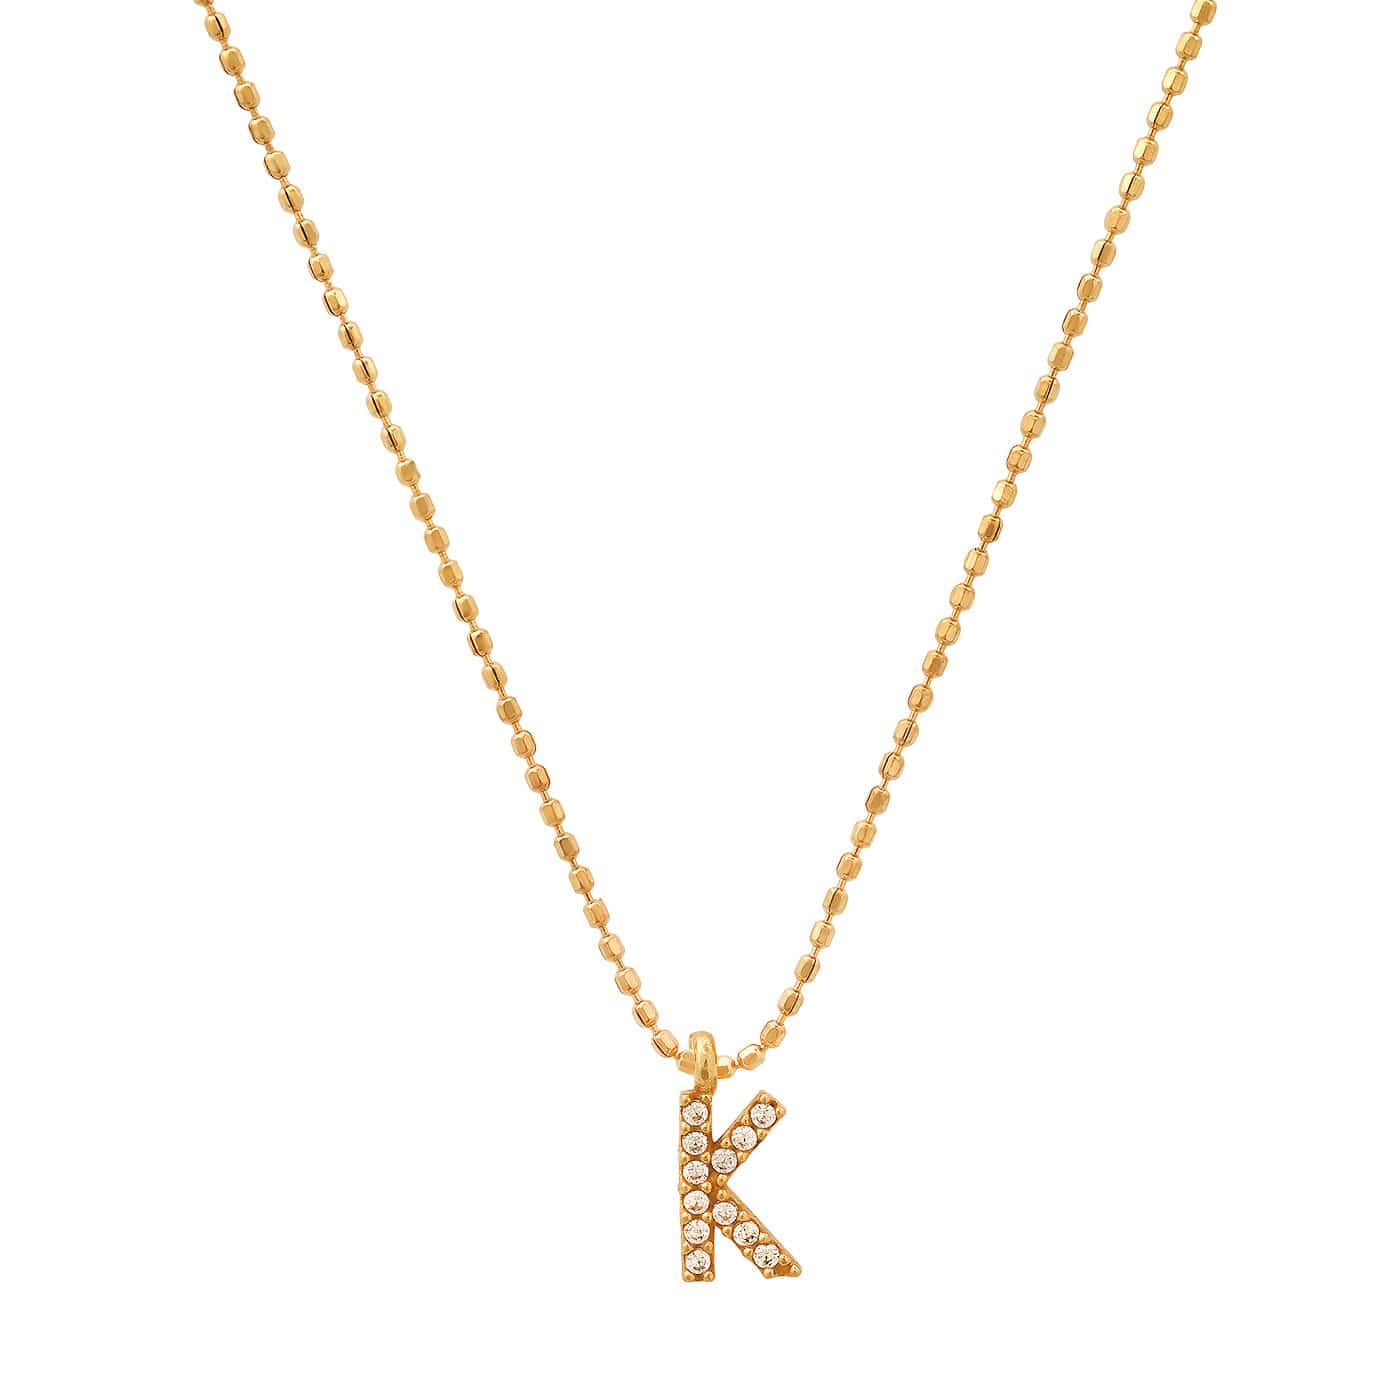 TAI JEWELRY Necklace K Pave Initial Ball Chain Necklace